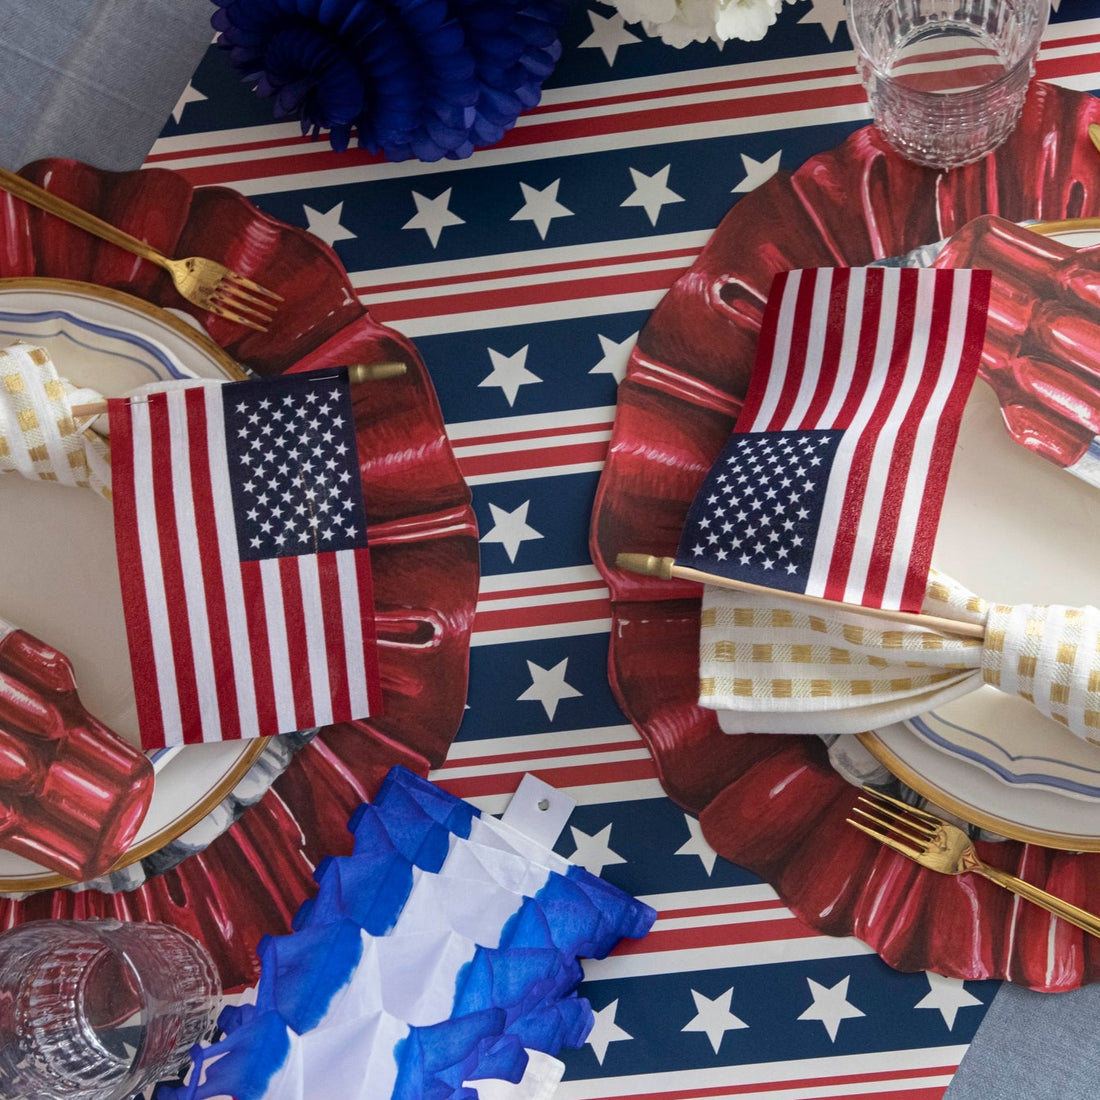 The Stars and Stripes Runner under a patriotic table setting, from above.